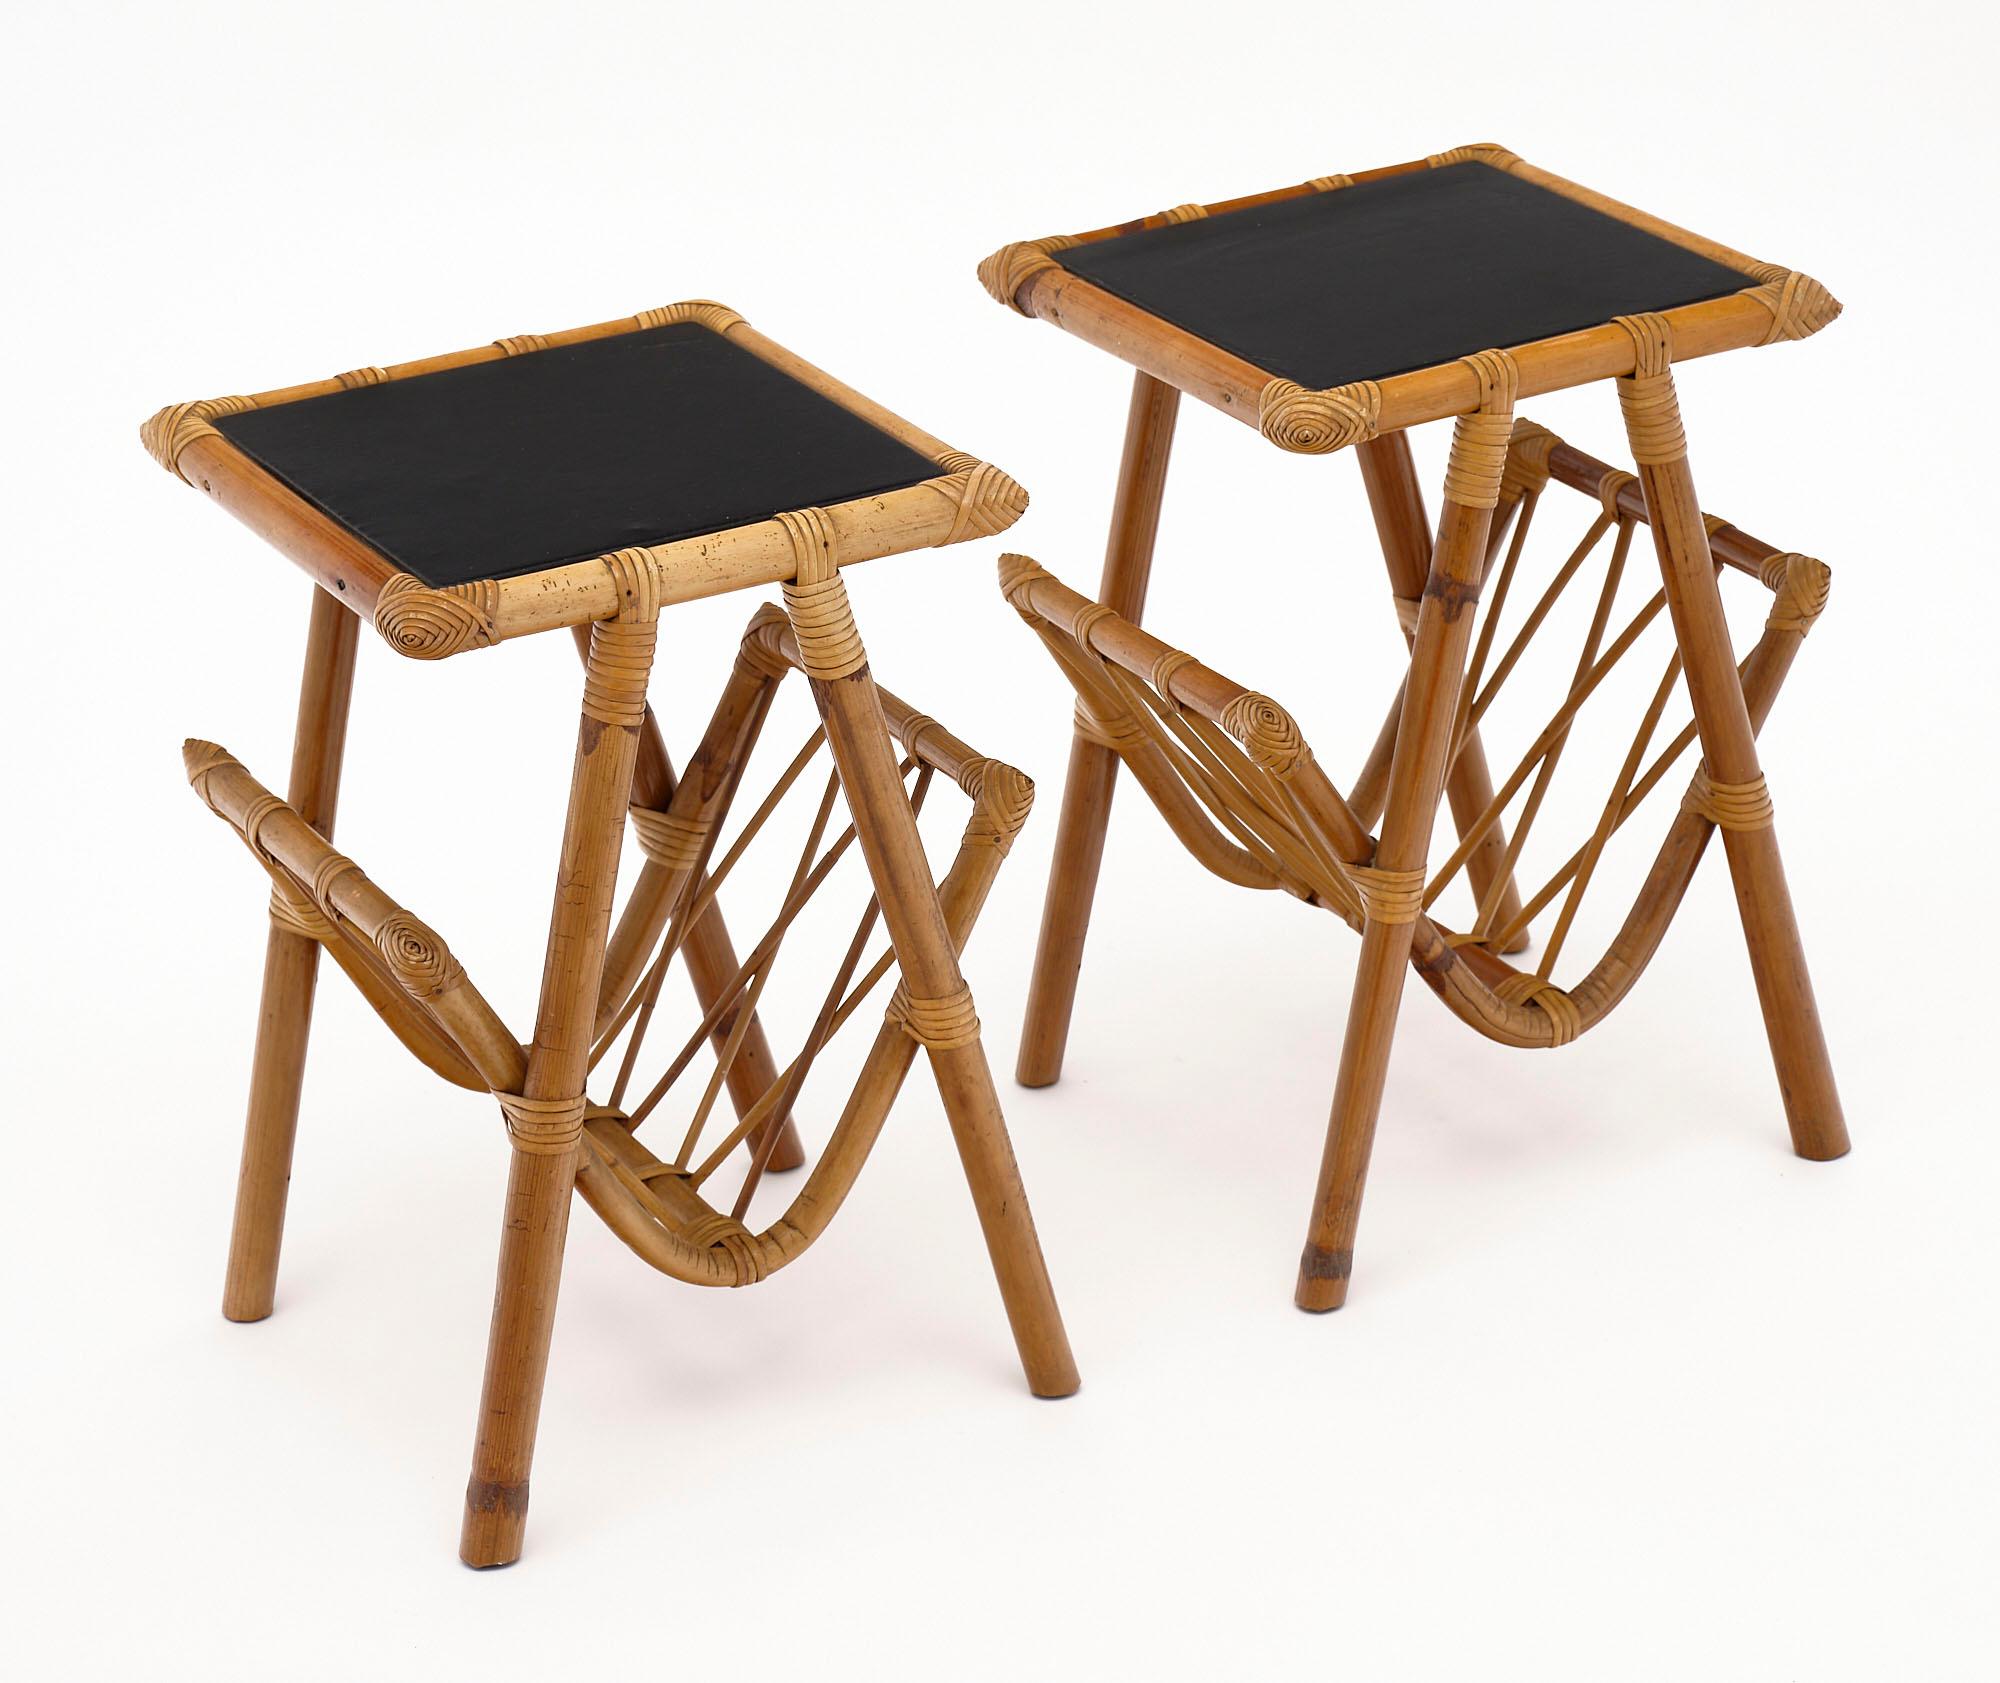 French Rattan side tables with black vinyl tops. The tables have magazine/book holders below.